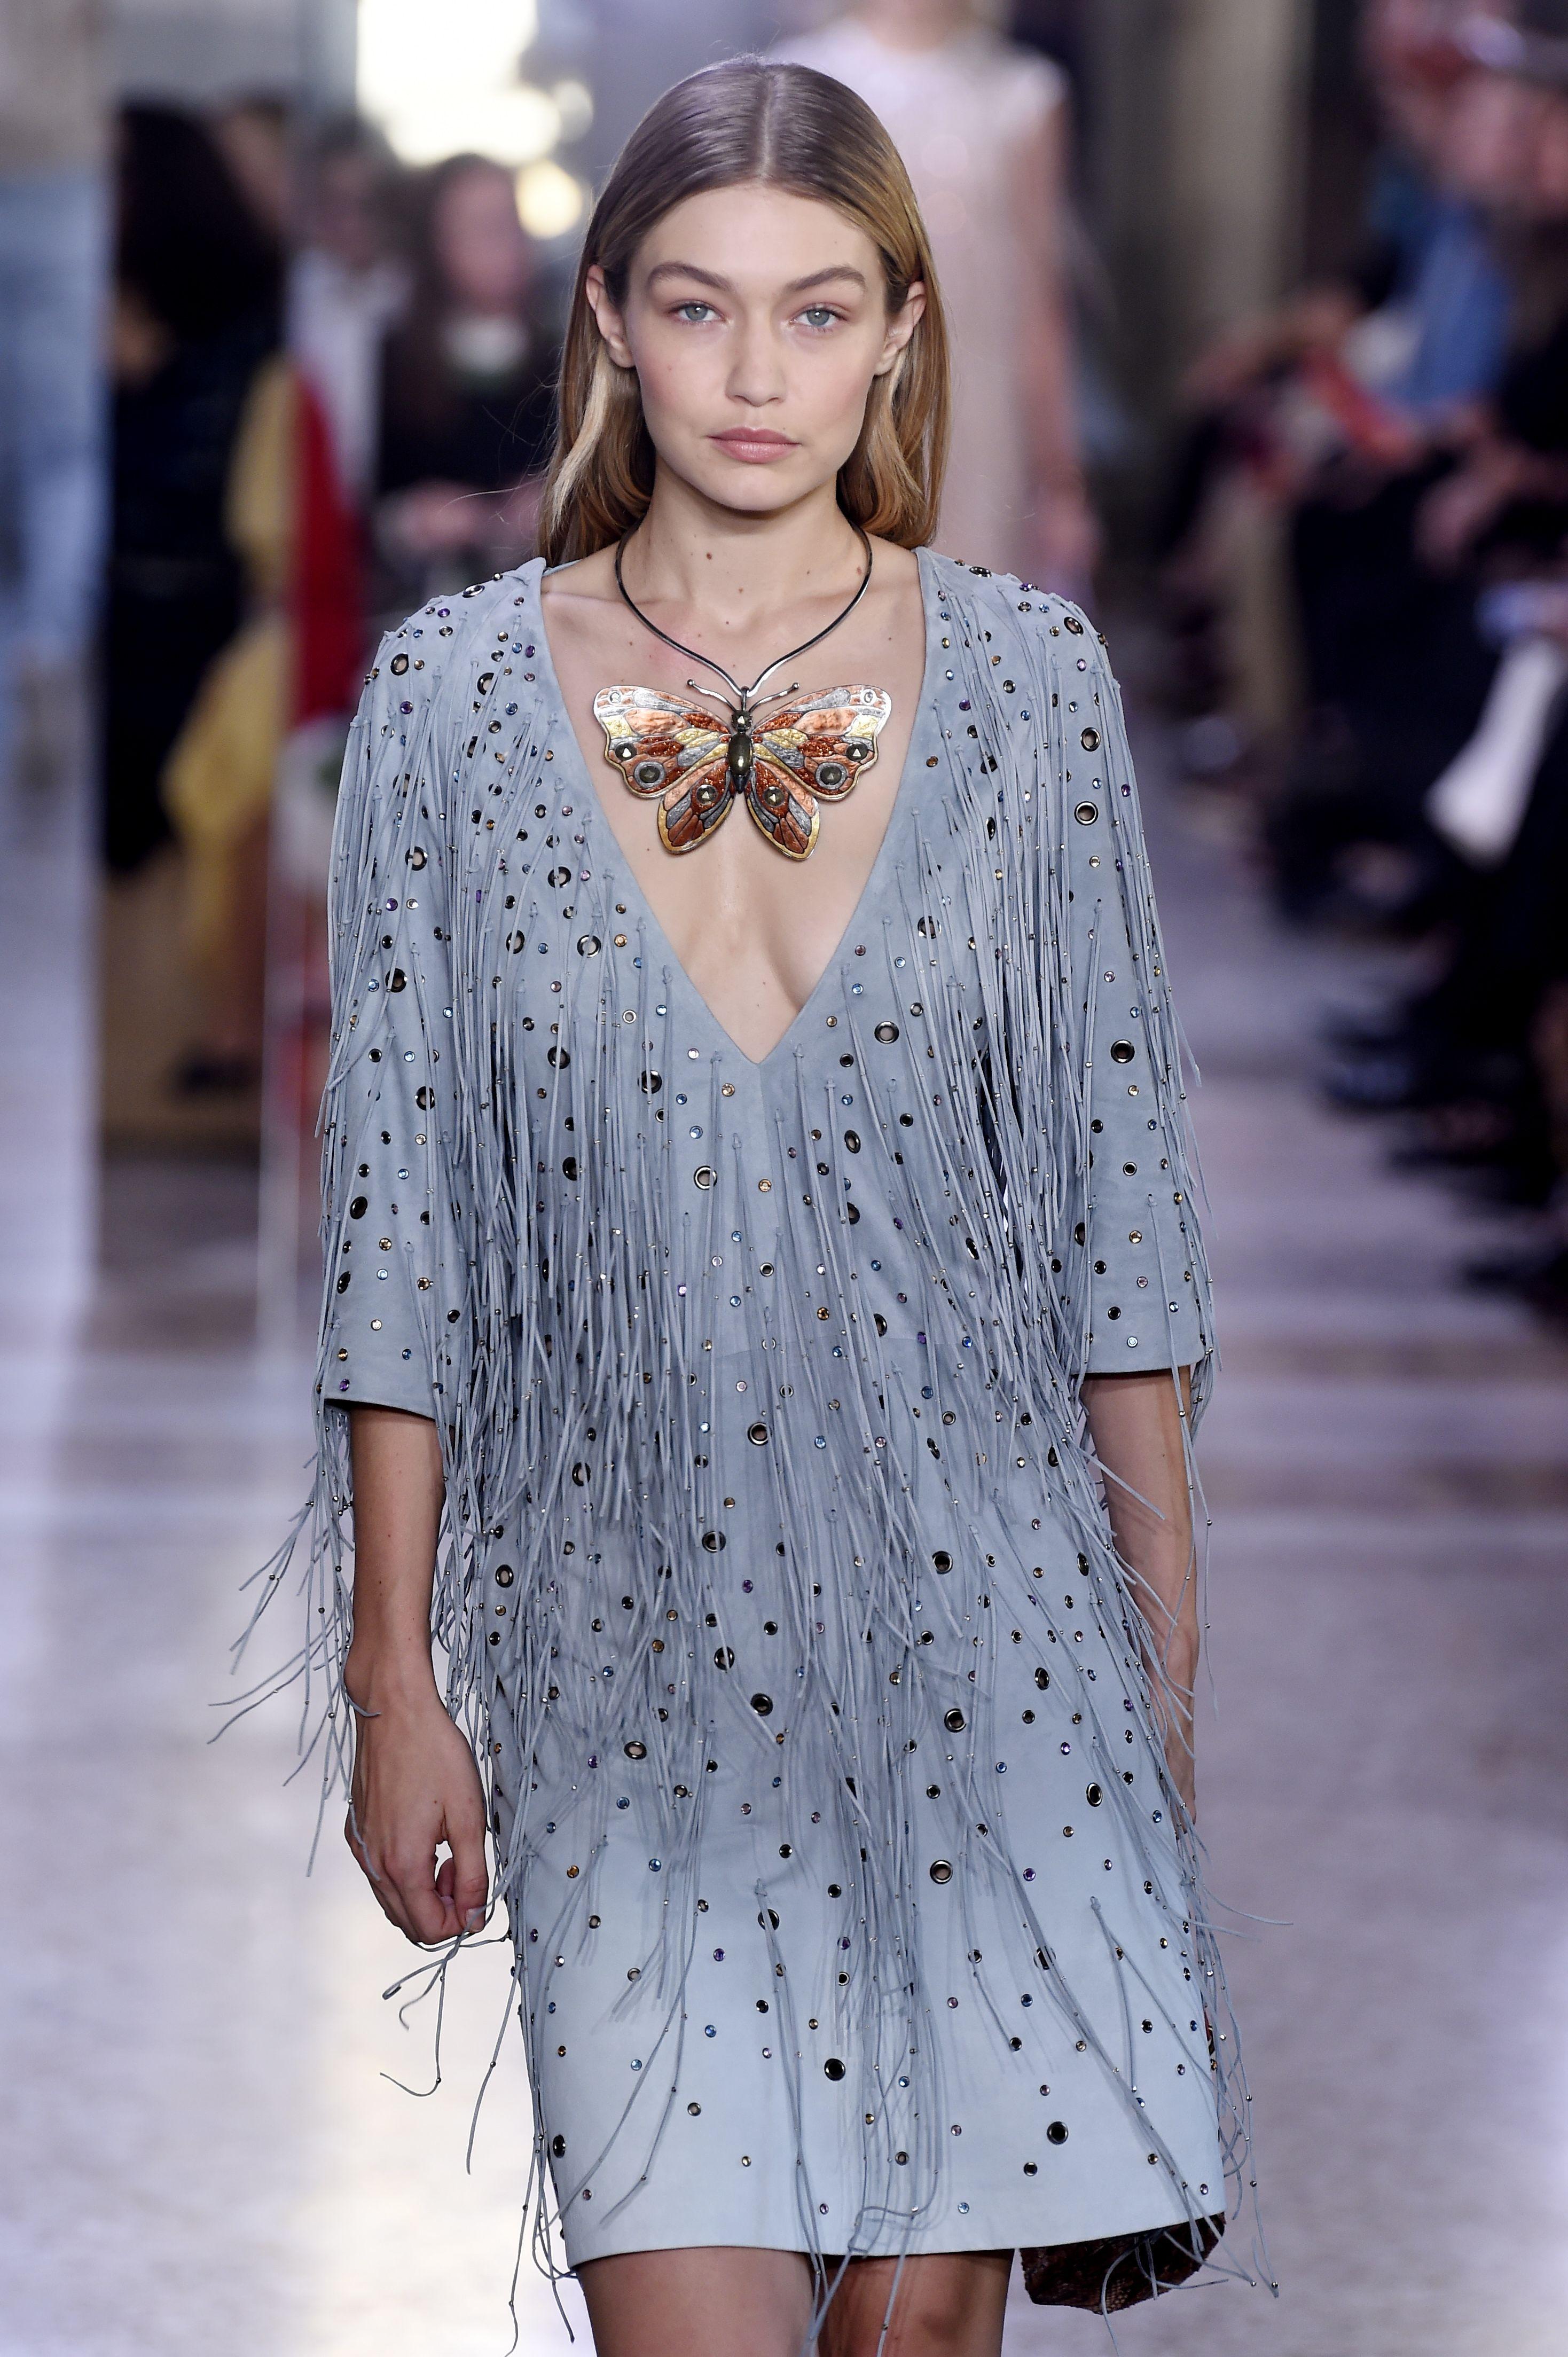 -Beautiful dress from Bottega Veneta Spring Summer 2018 
-Worn by Gigi Hadid on the runway
-Dress is made of powder blue suede, shaded by hand
-Hand-threaded beads on the fringe
-Made in Italy

Approximate Measurements 
-Total length: